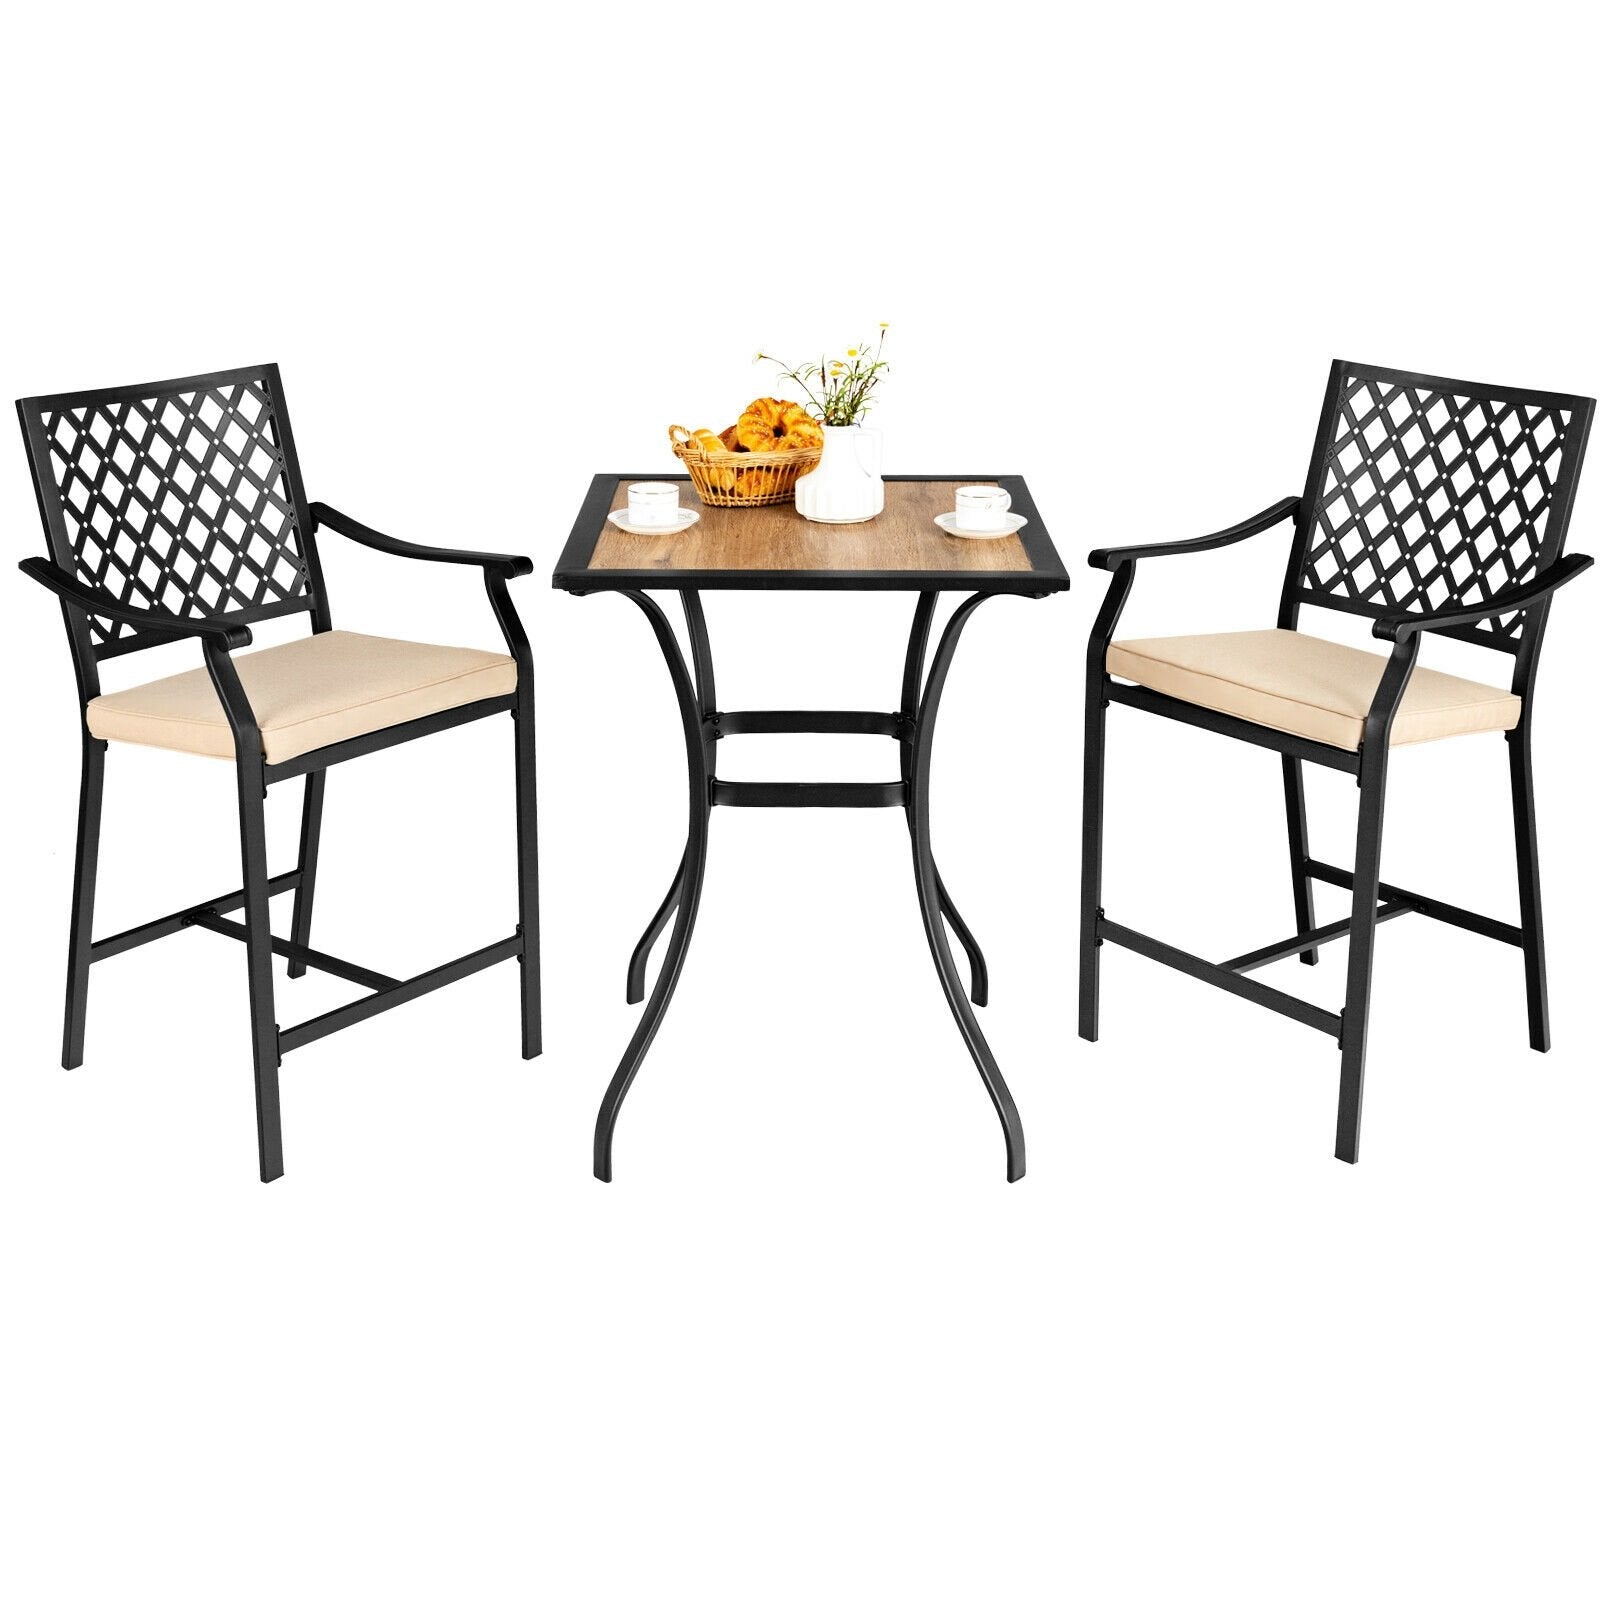 3 Pieces Patio Bar Set with 2 Bar Stools and 1 Square Table, Beige - Gallery Canada